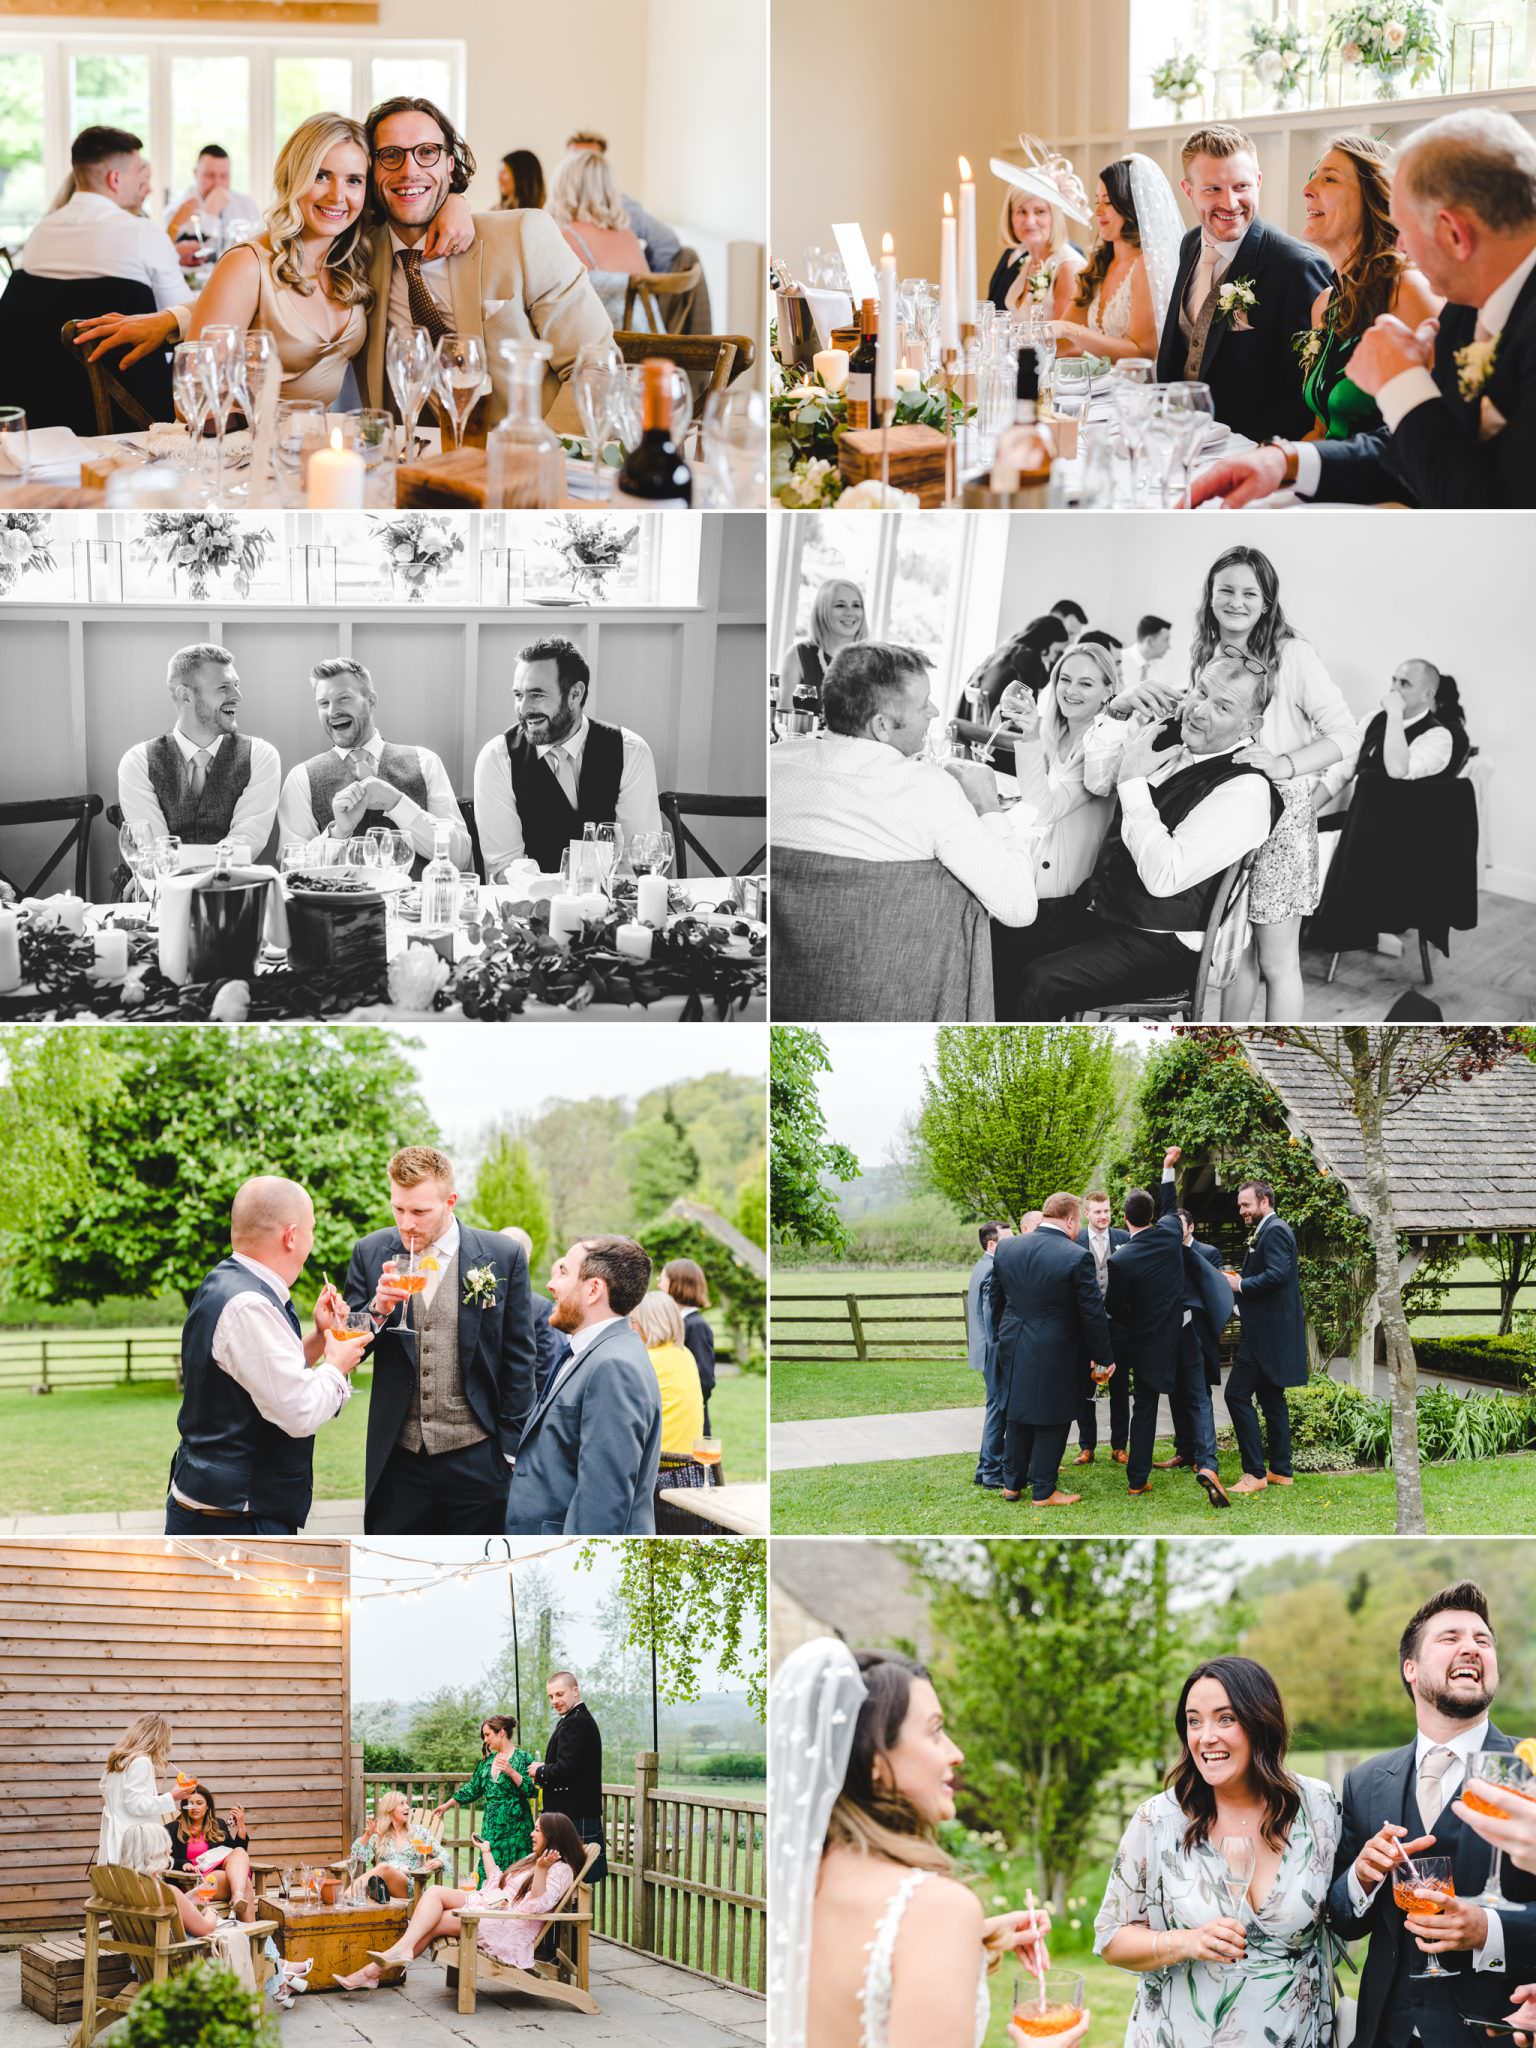 Photos of the wedding breakfast at a Hyde House Wedding